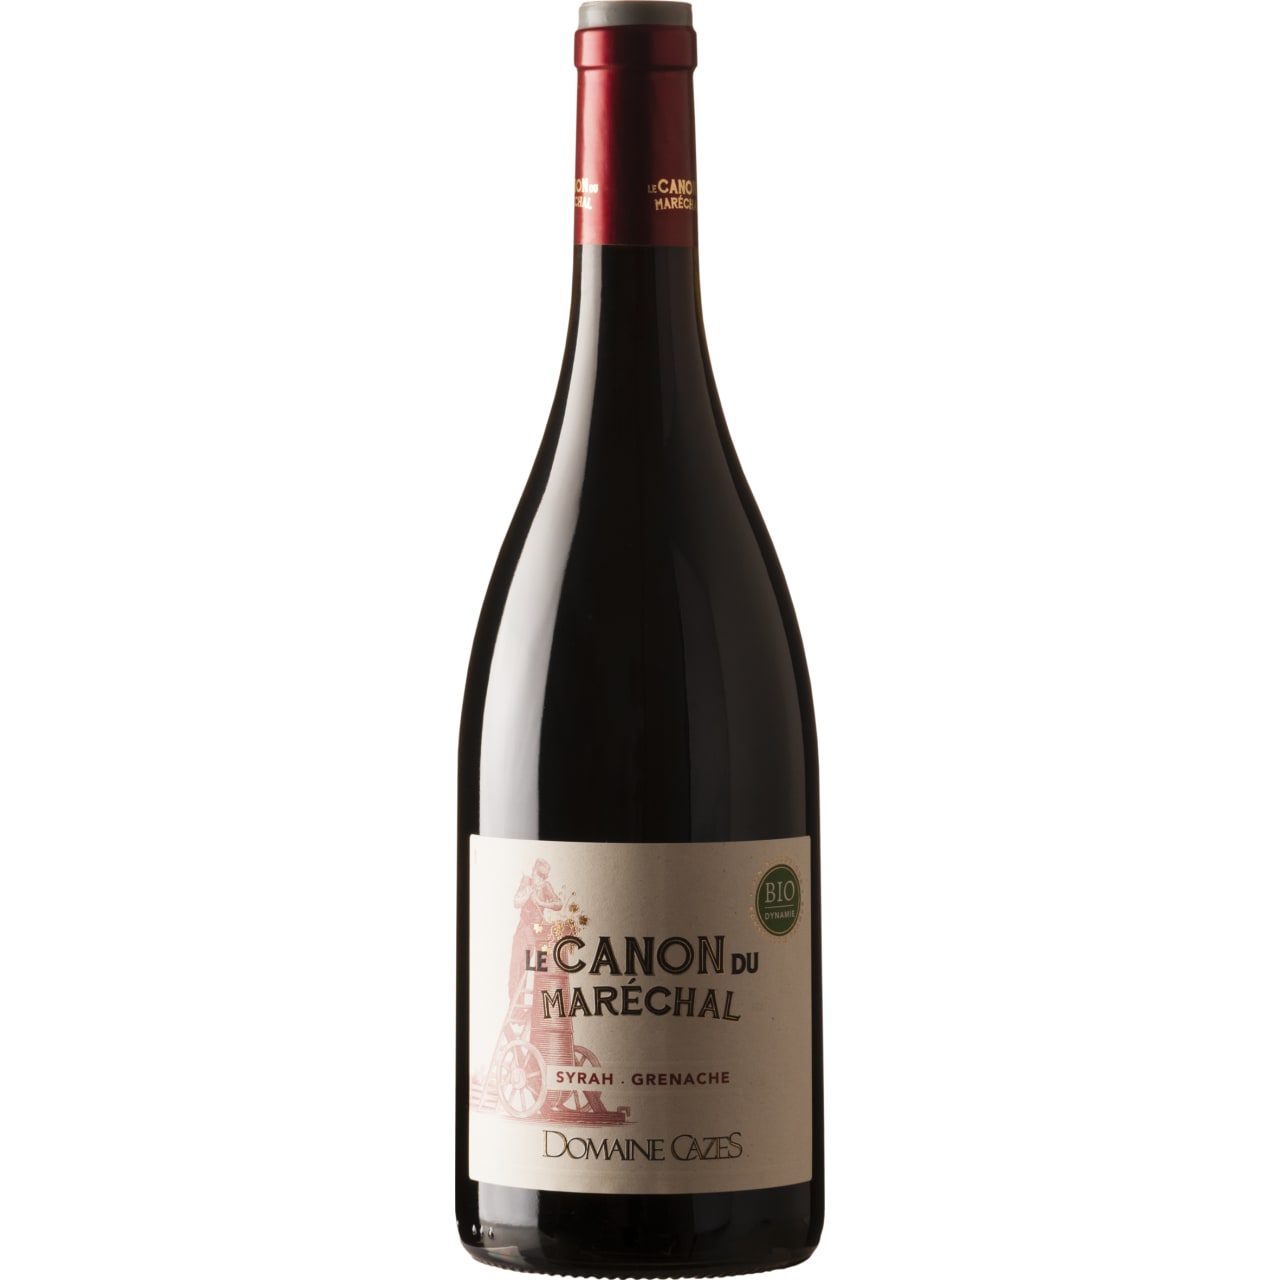 On the palate, red fruit flavours of redcurrant, raspberry, cherry are melted with spicy notes.